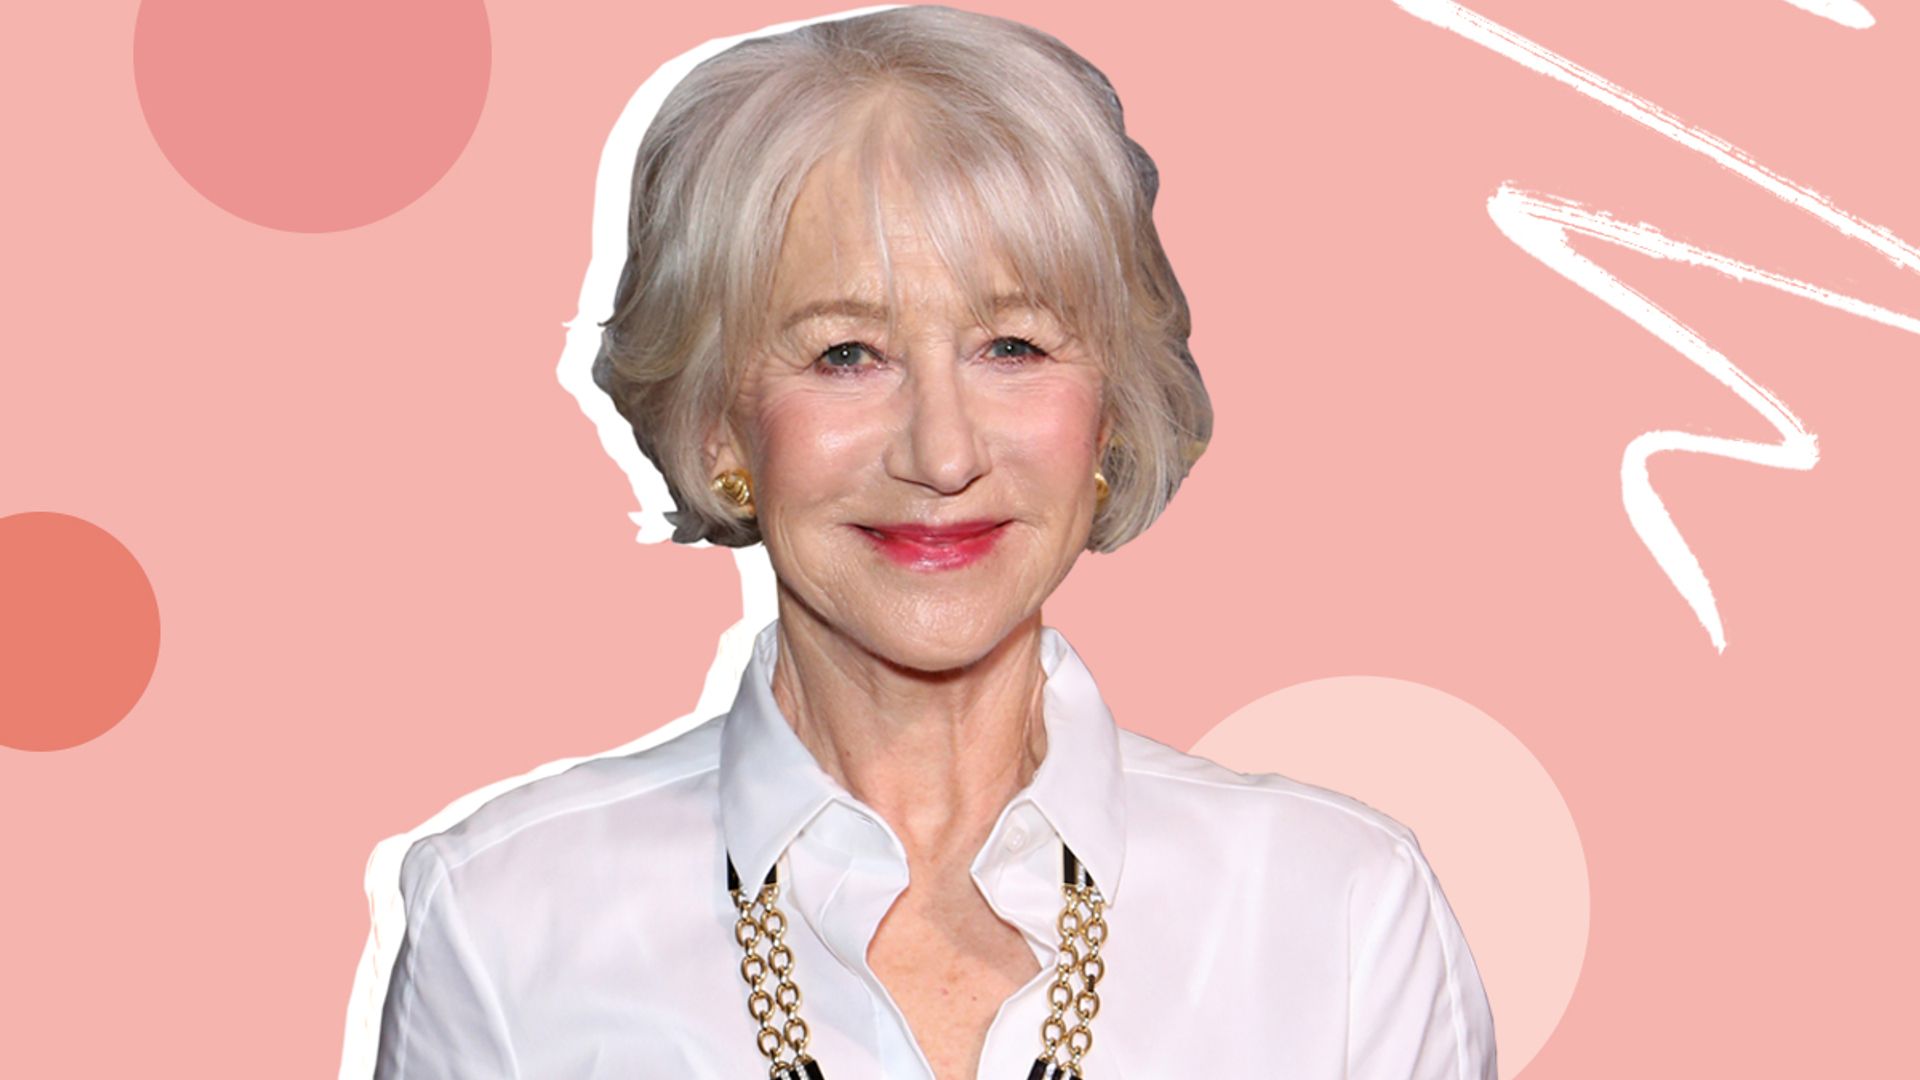 Helen Mirren bravely opens up about mental health: 'those negative thoughts are always lurking'